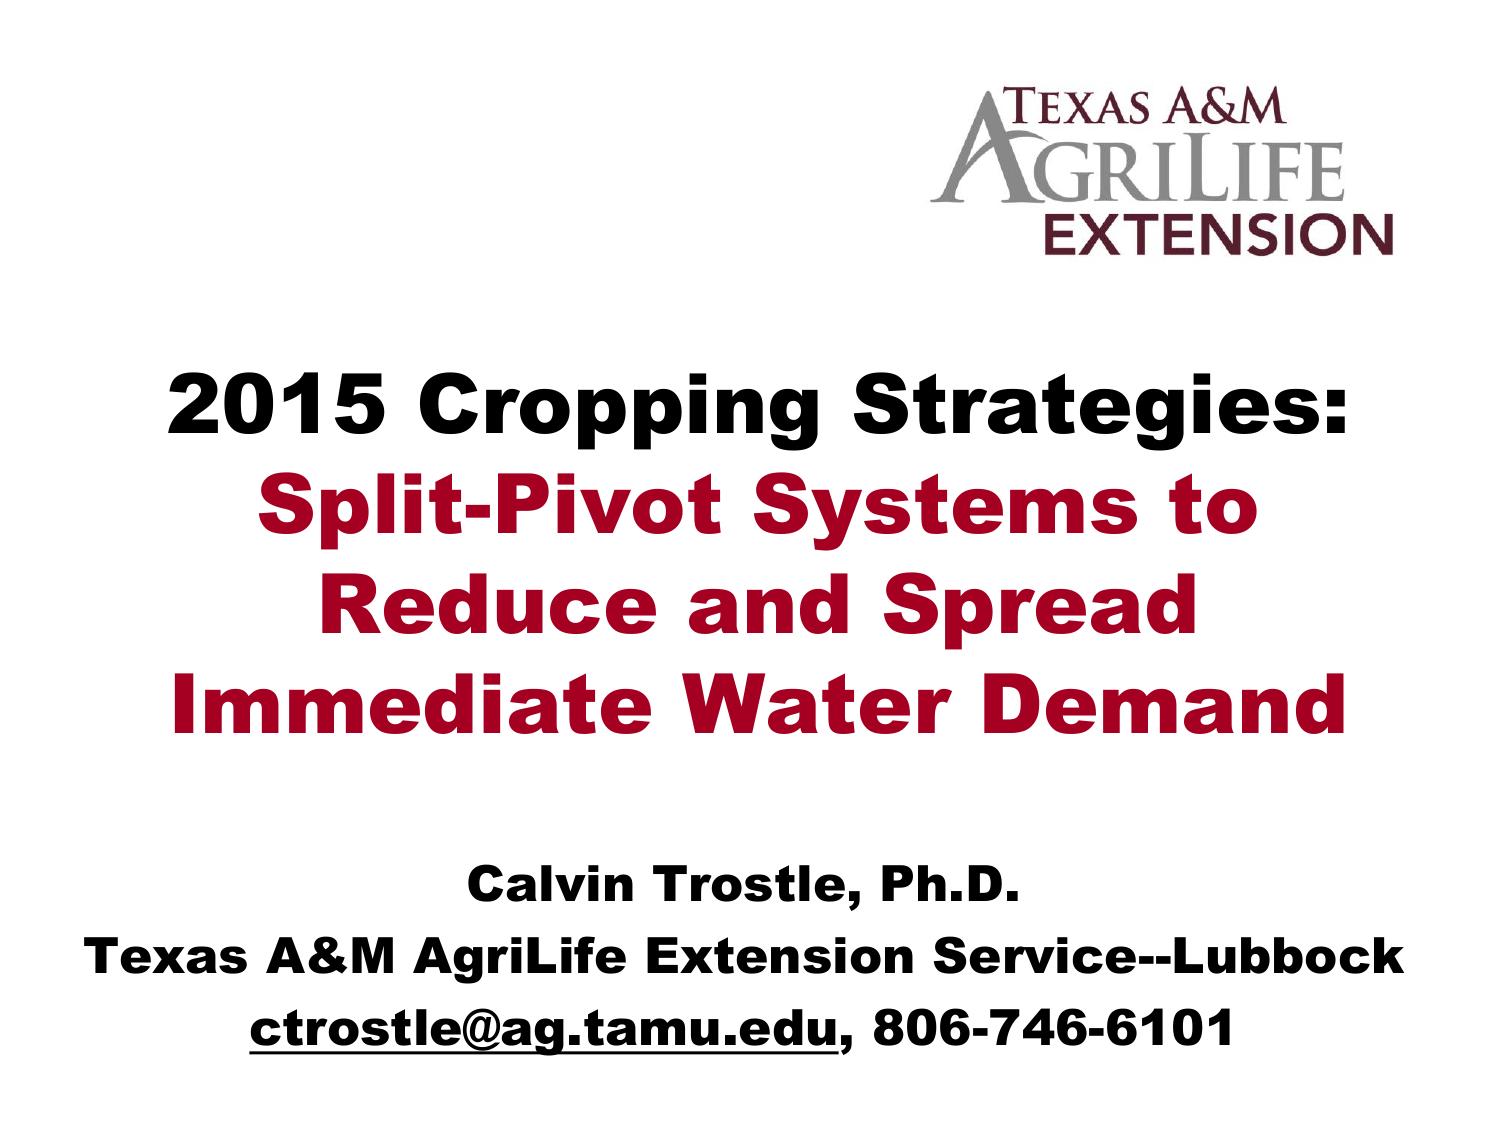 Sorghum Agronomy for the Texas South Plains